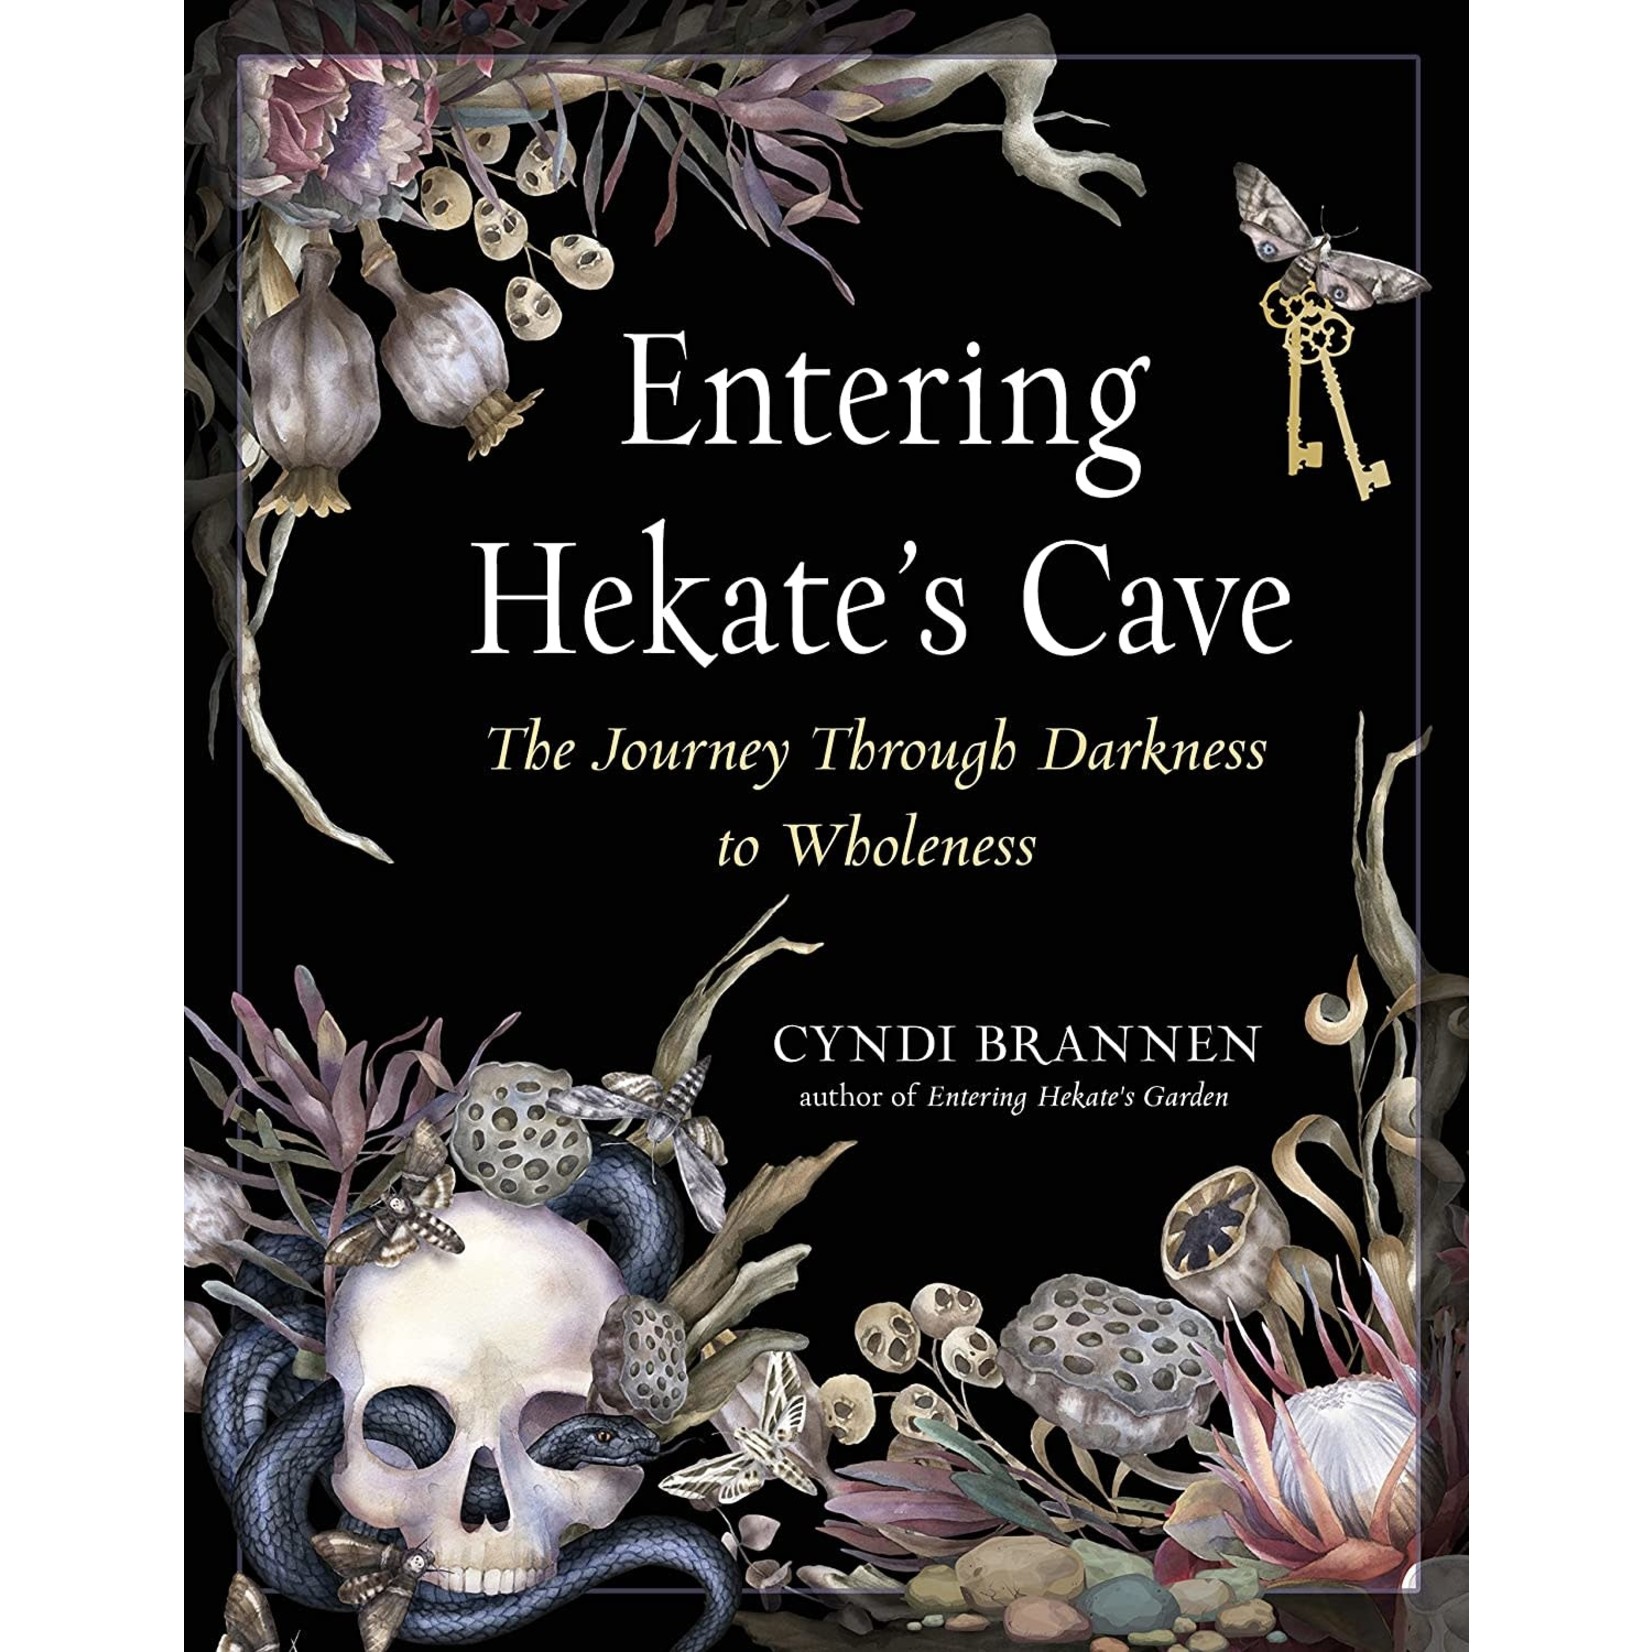 Entering Hekate's Cave by Cyndi Brannen